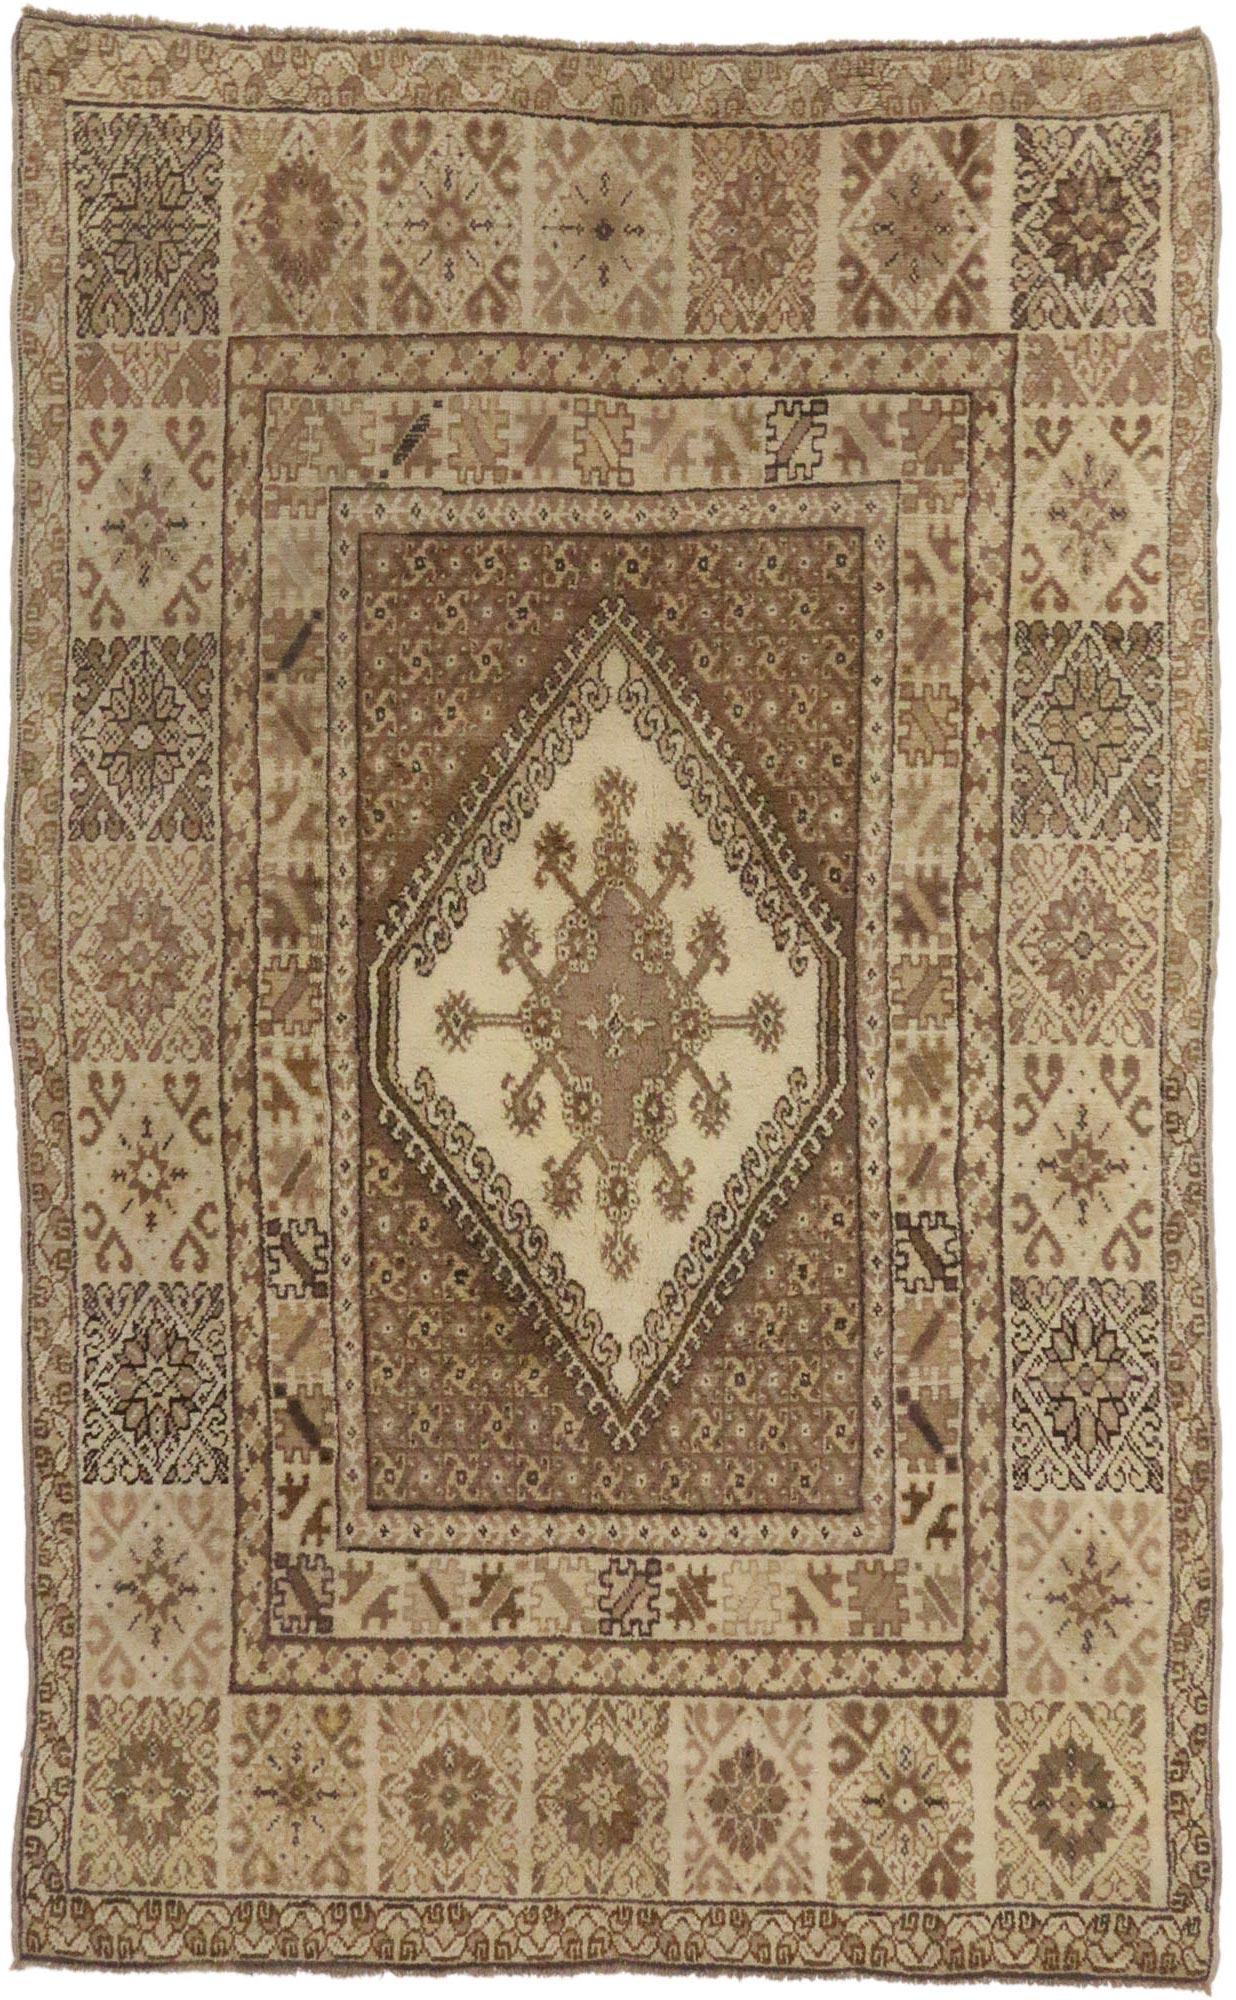 Wool Vintage Berber Rabat Moroccan Rug with Neutral Earth-Tone Colors For Sale